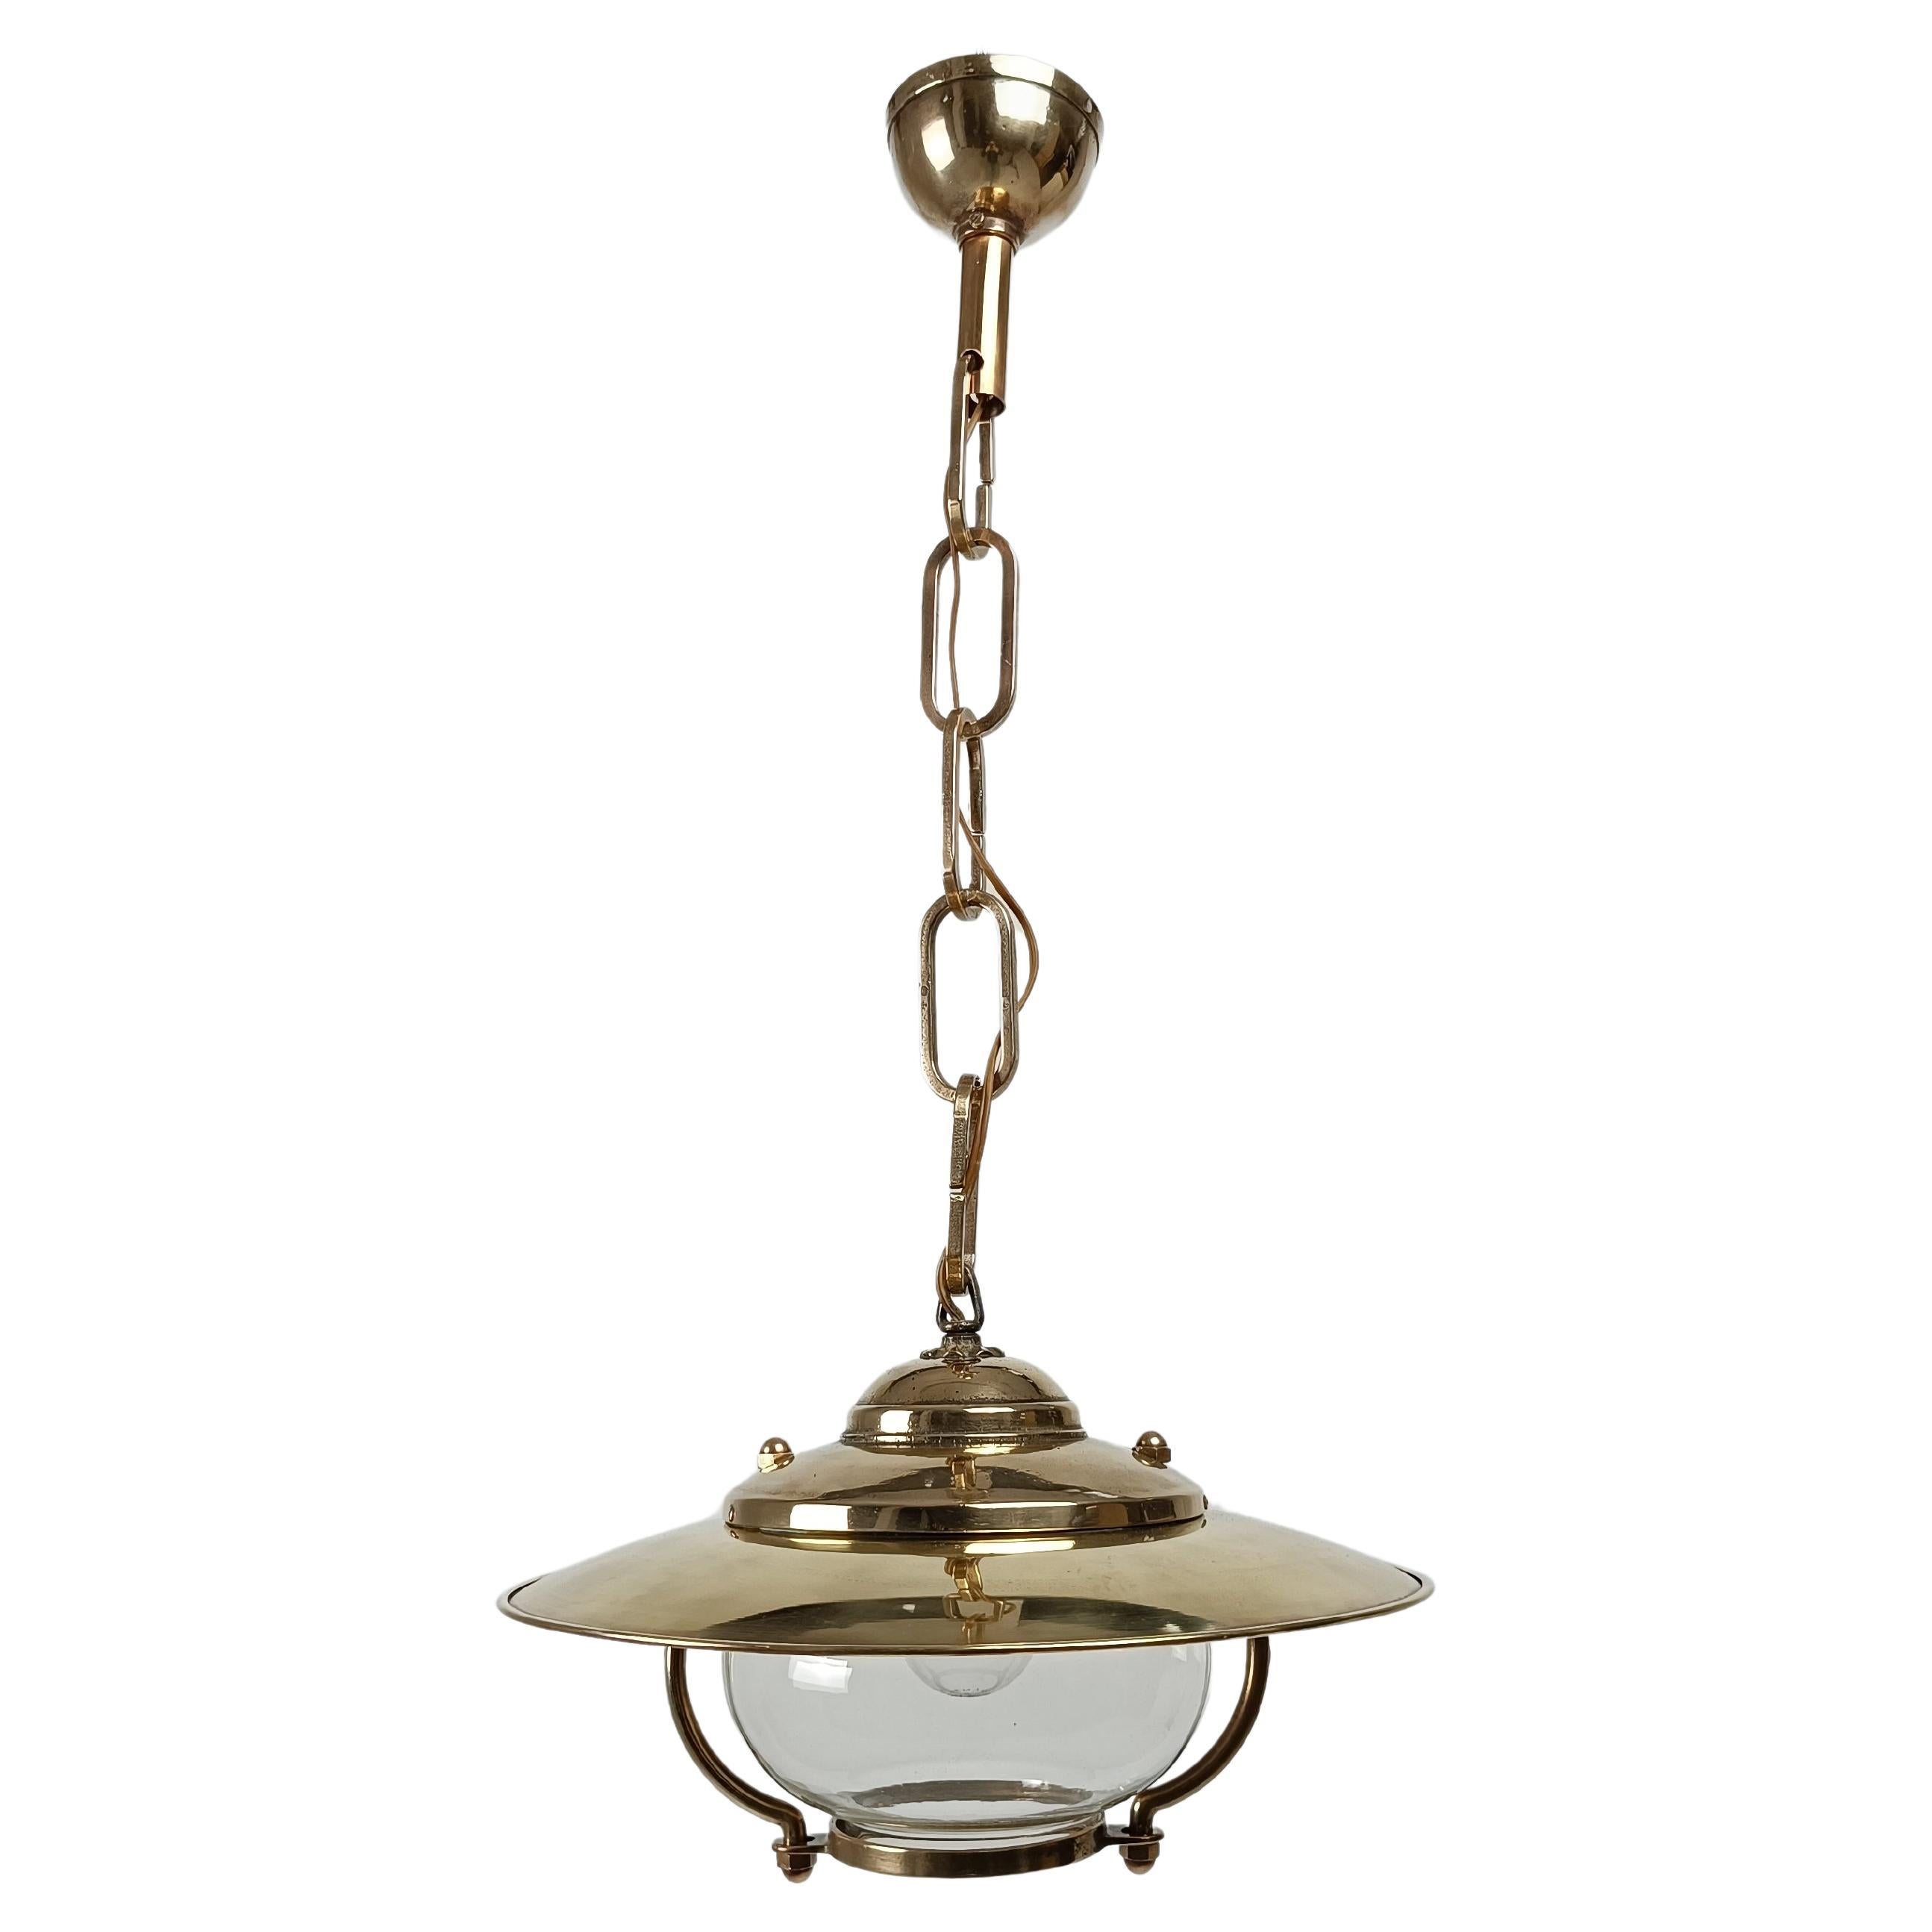 Italian Mid-20th Century Brass Pendant Lamp or Lantern in Nautical Style  For Sale